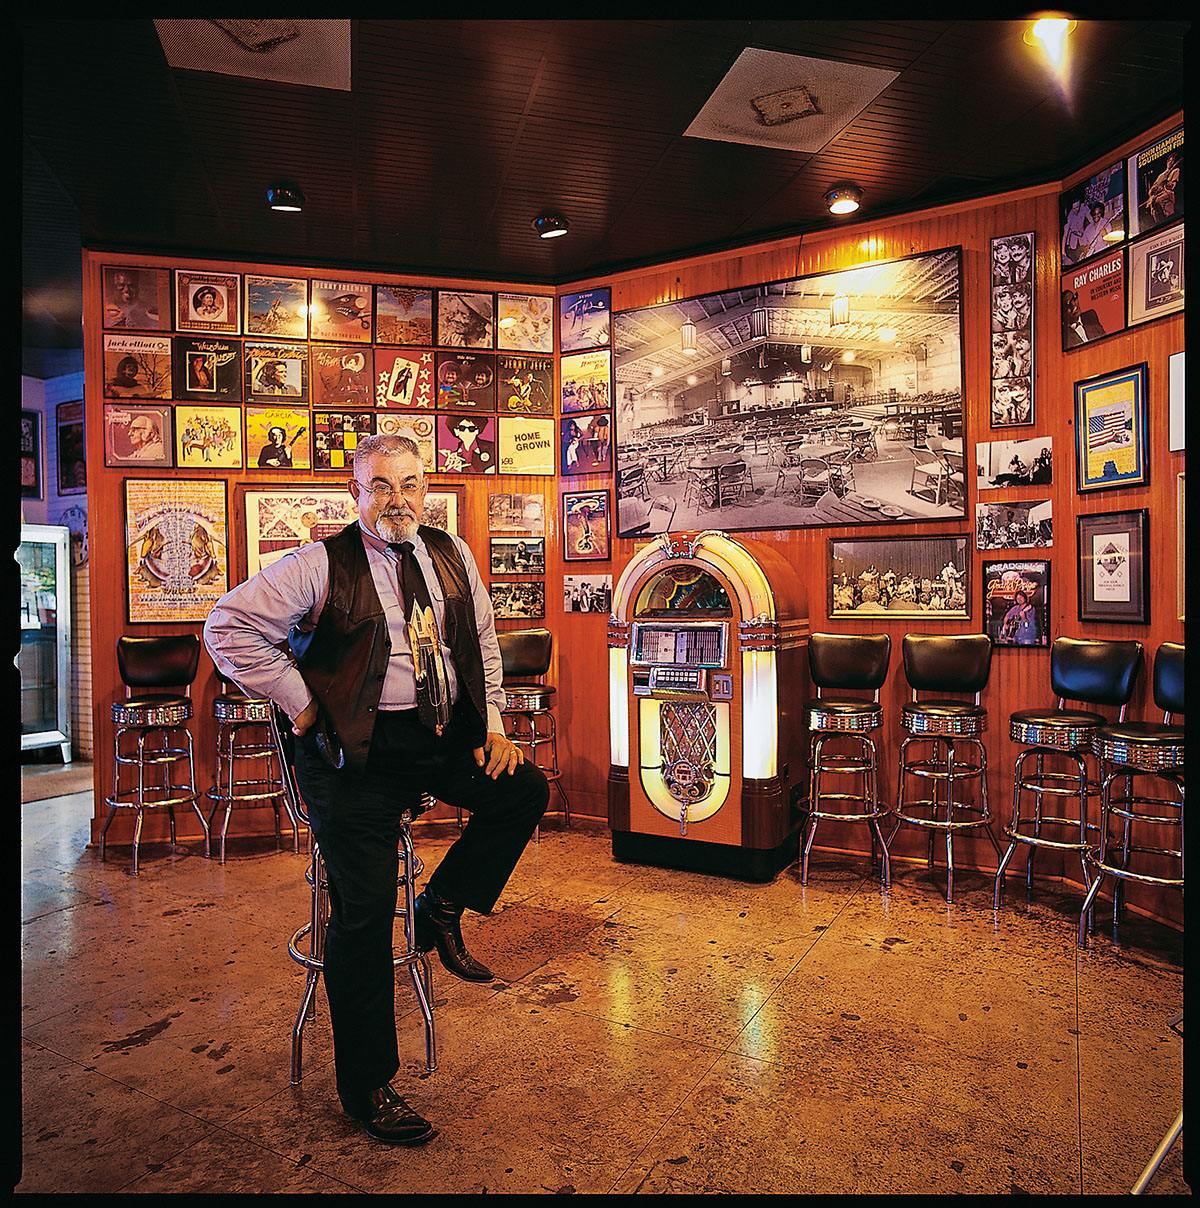 A man in old Western wear stands with his leg propped on a stool inside of a richly painted room decorated with music memorabilia